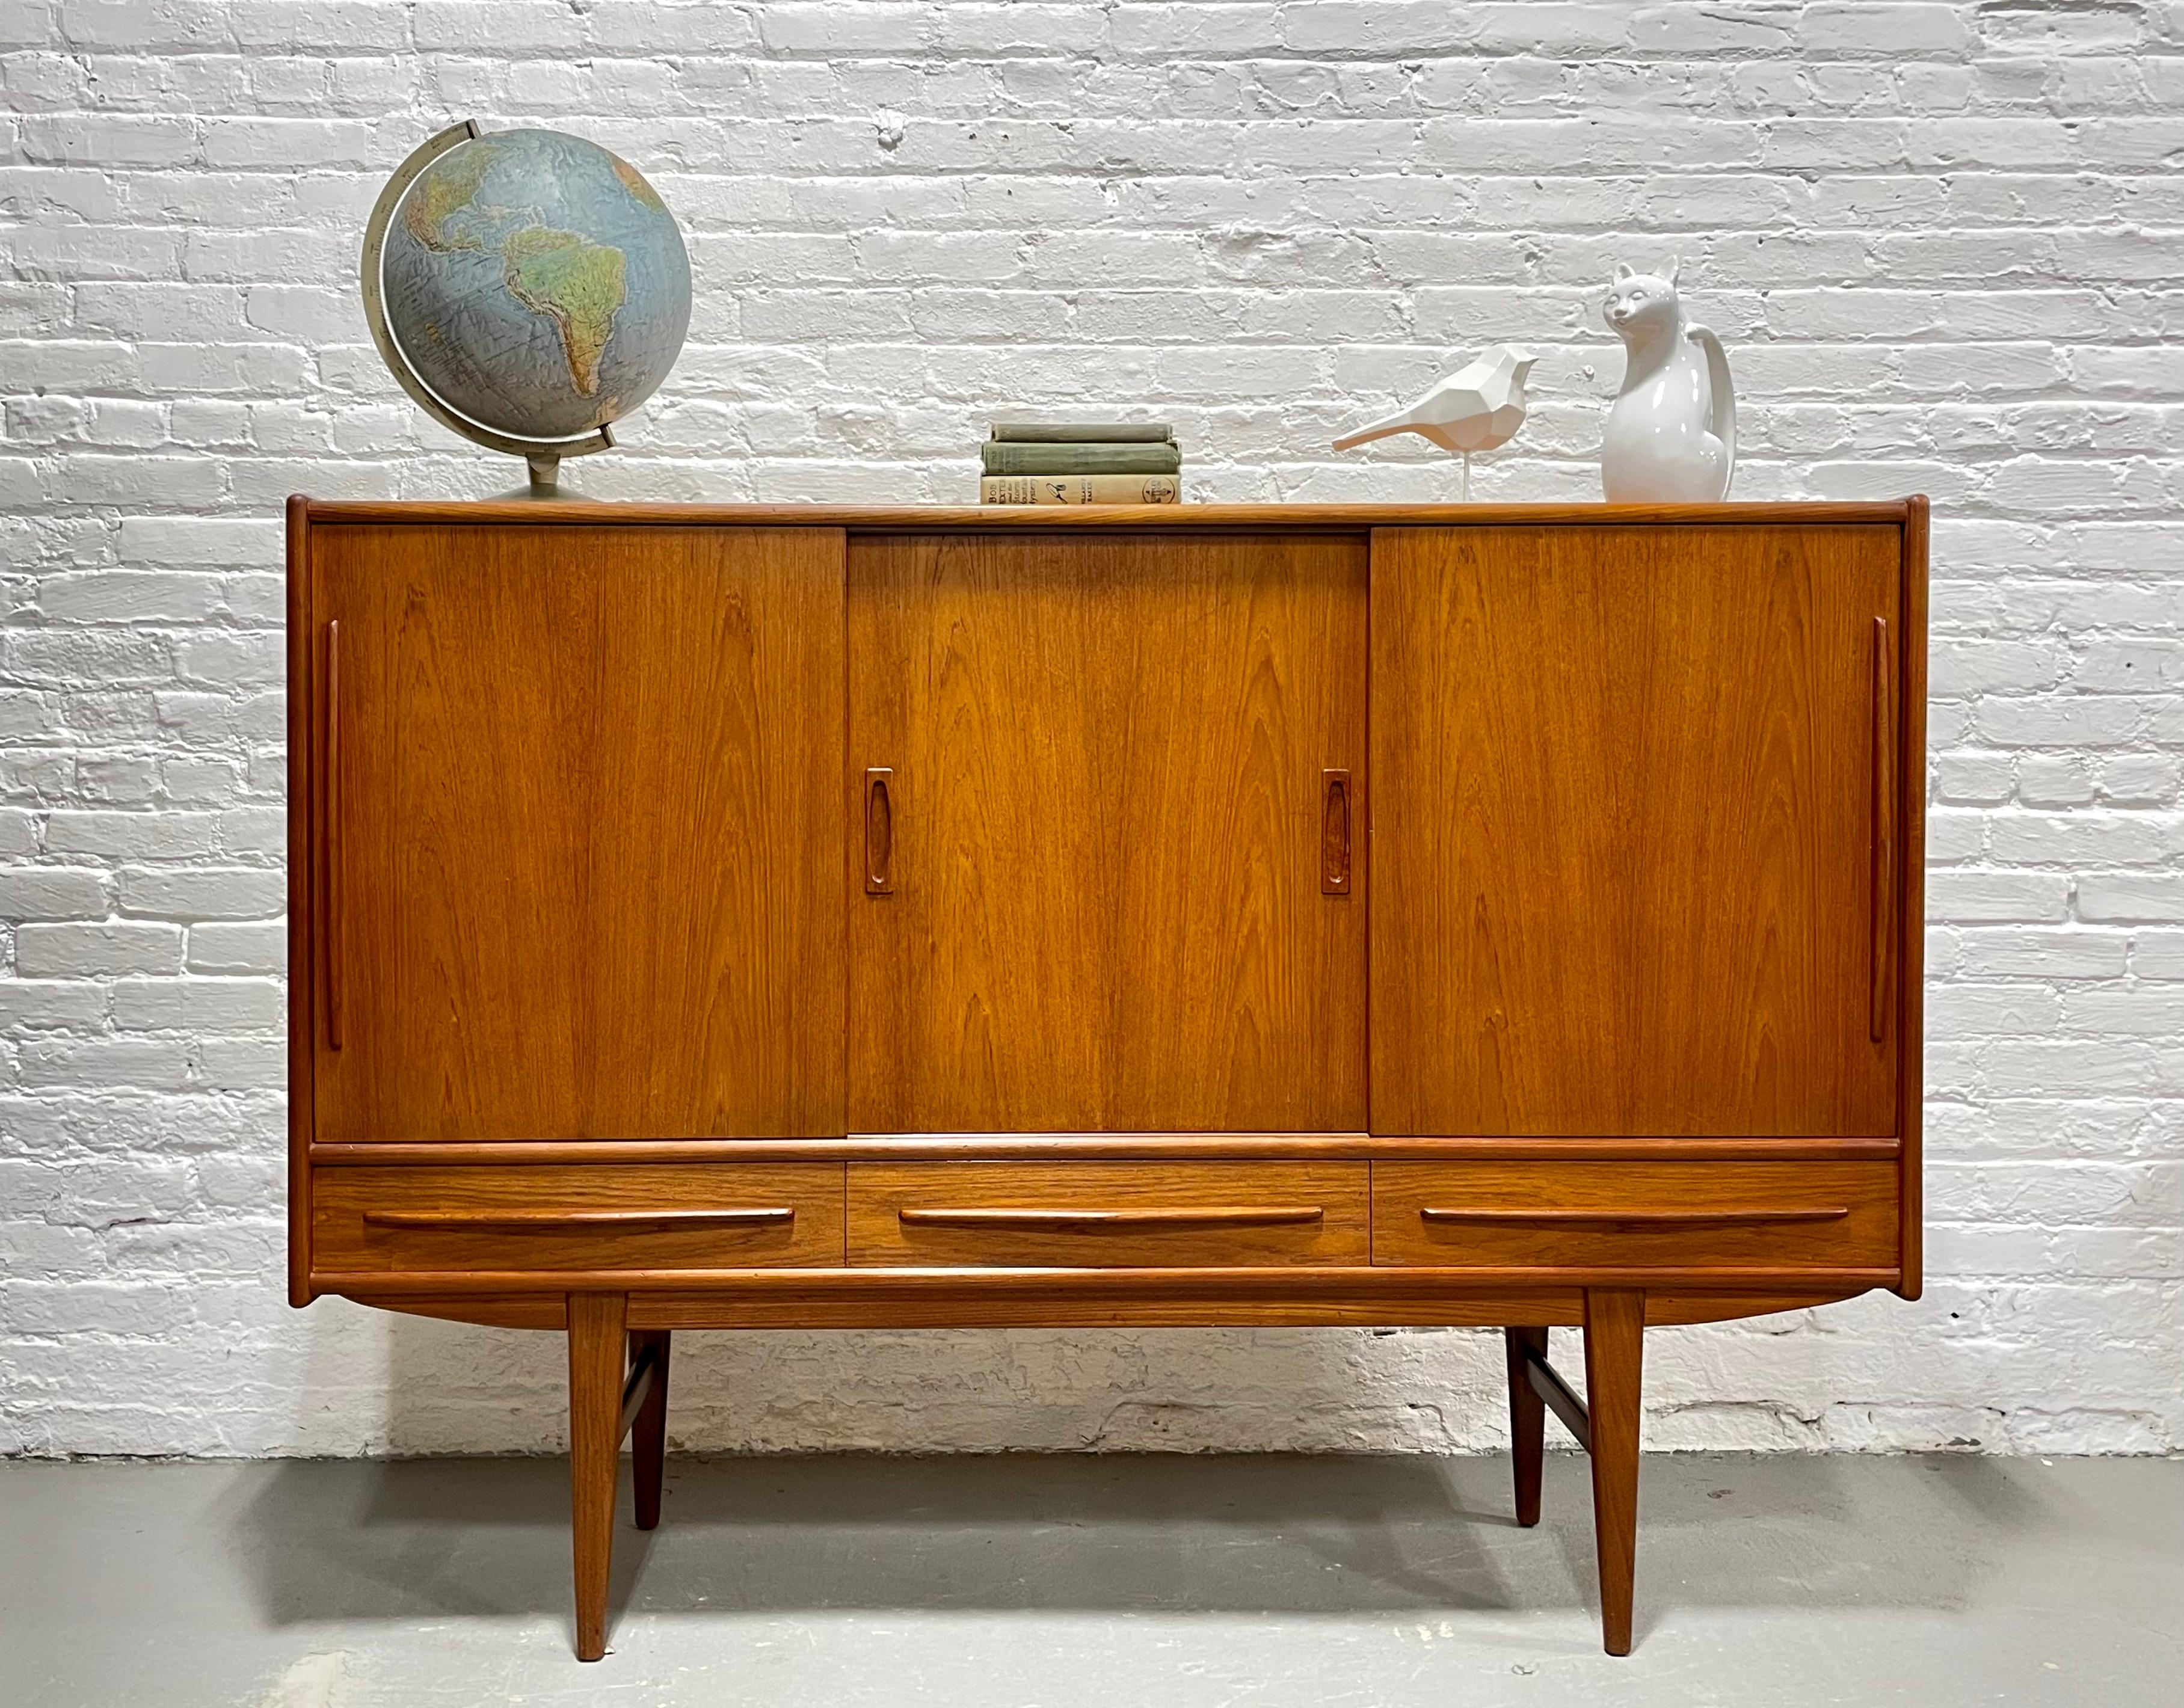 Stunning Mid Century Modern Danish Teak Highboard Credenza / Sideboard, c. 1960's. This incredible piece is gorgeous in its simple yet extremely functional design. This beauty offers  three sliding door compartments with loads of shelving storage